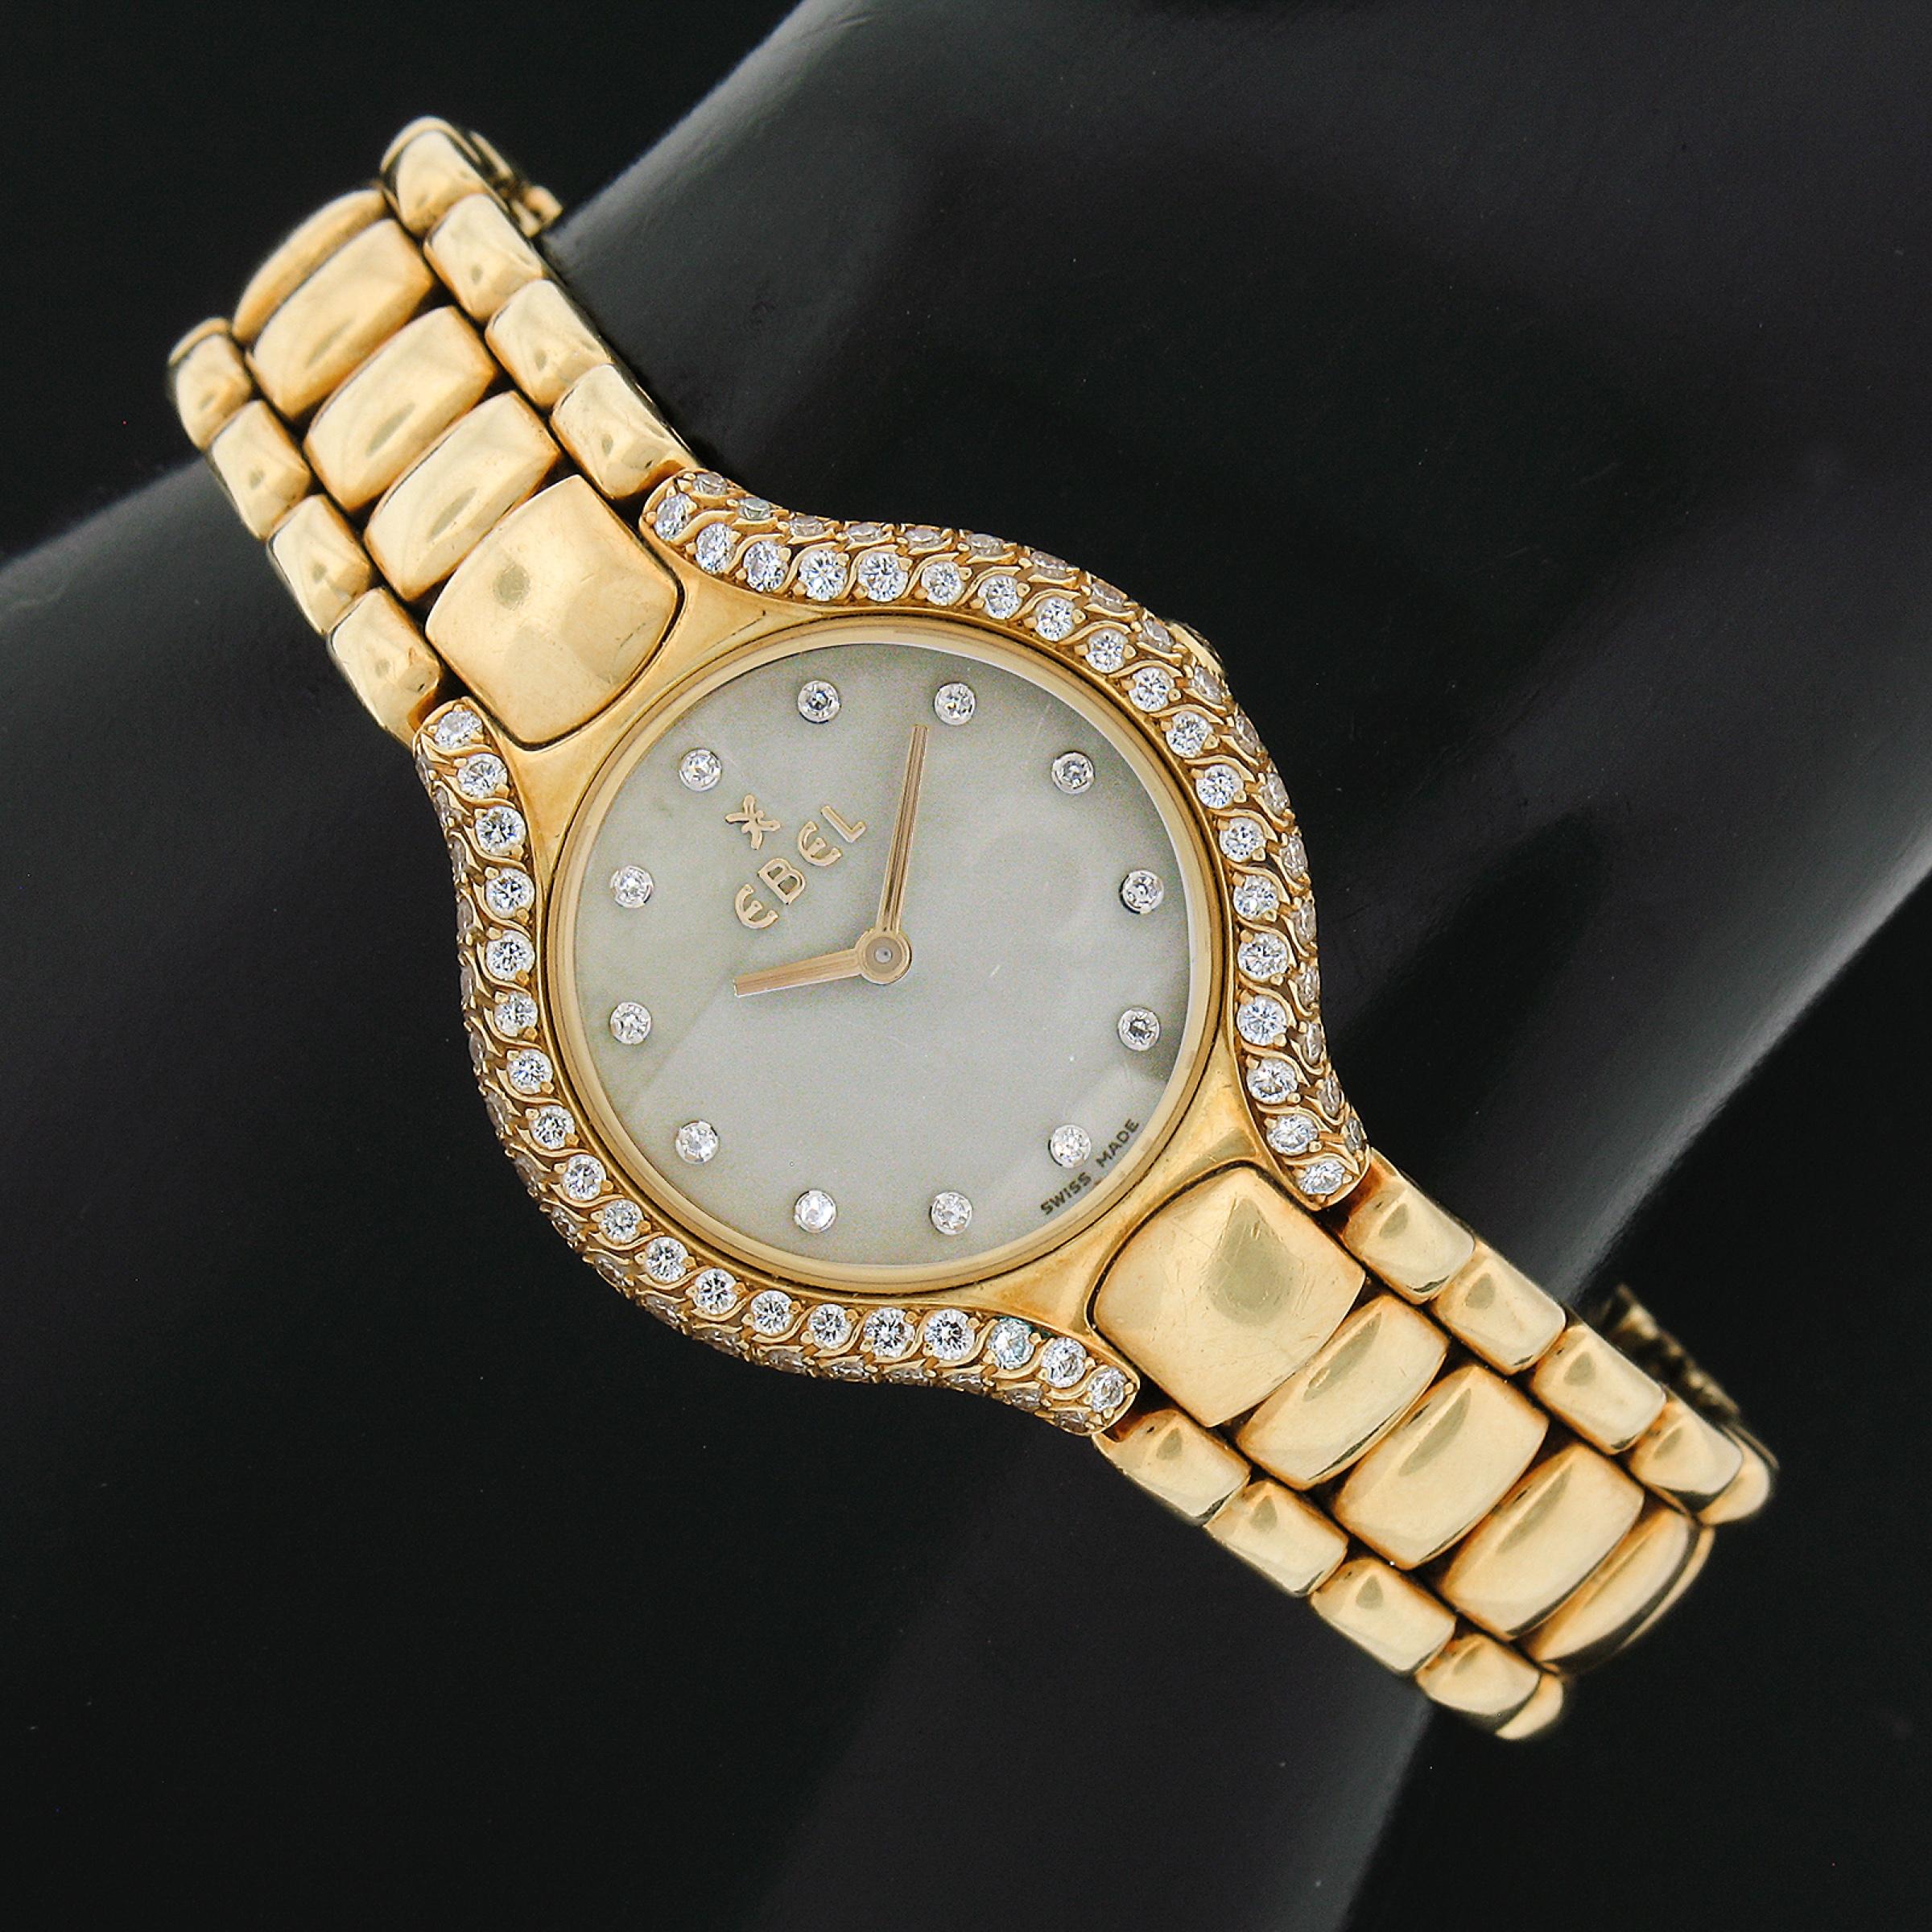 This stunning ladies' Ebel Beluga wrist watch features a 24mm solid 18k yellow gold round shaped case encrusted with outstandingly fine quality diamonds throughout totaling approximately 1.11 carats in weight. The bracelet is secured with a